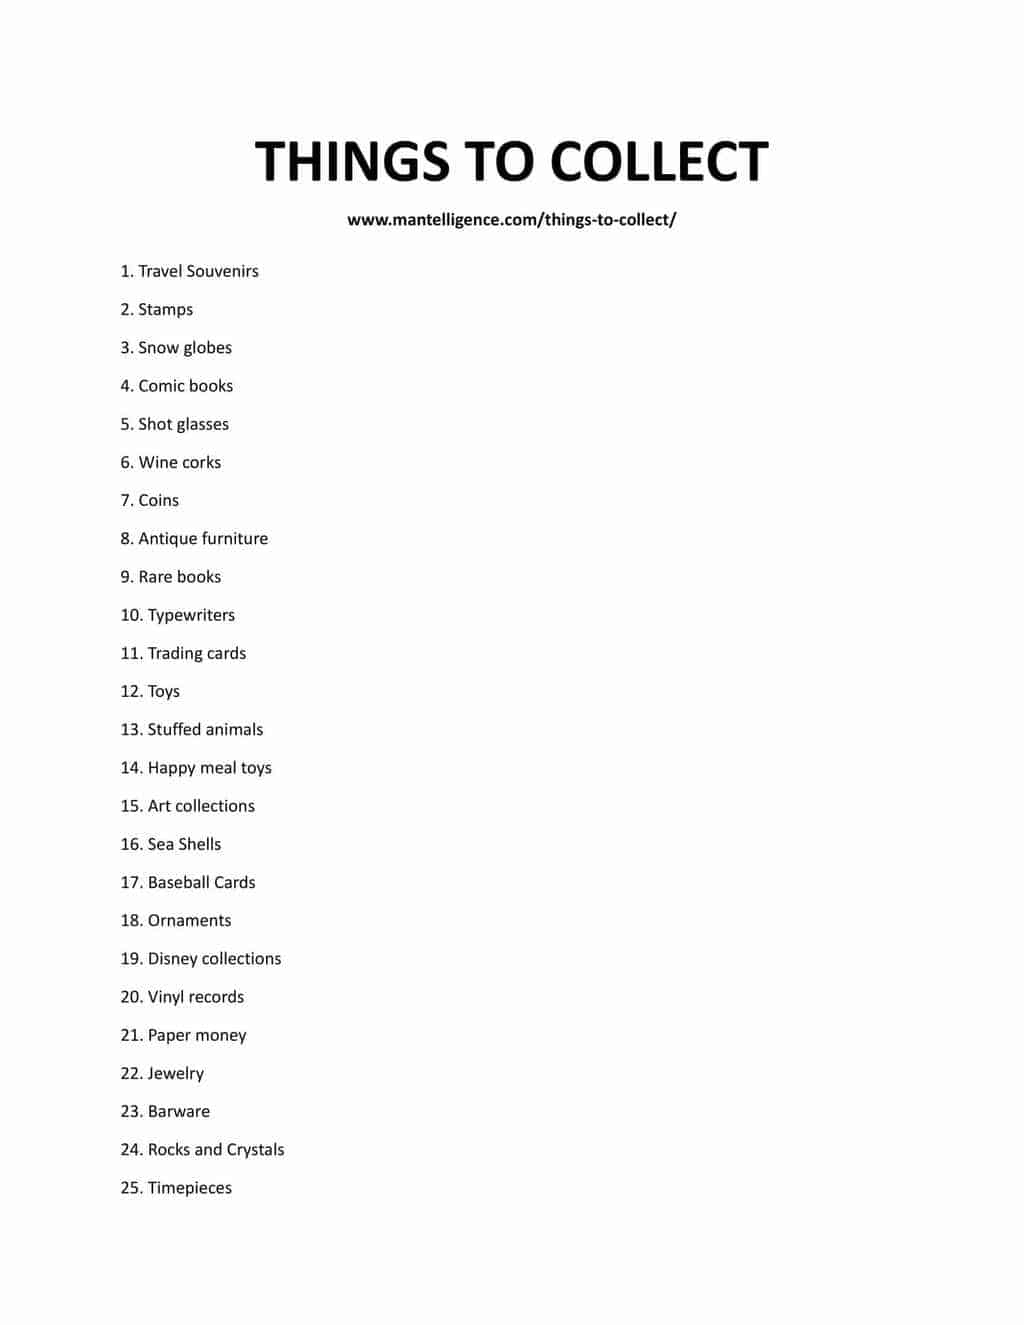 Downloadable and printable list of things